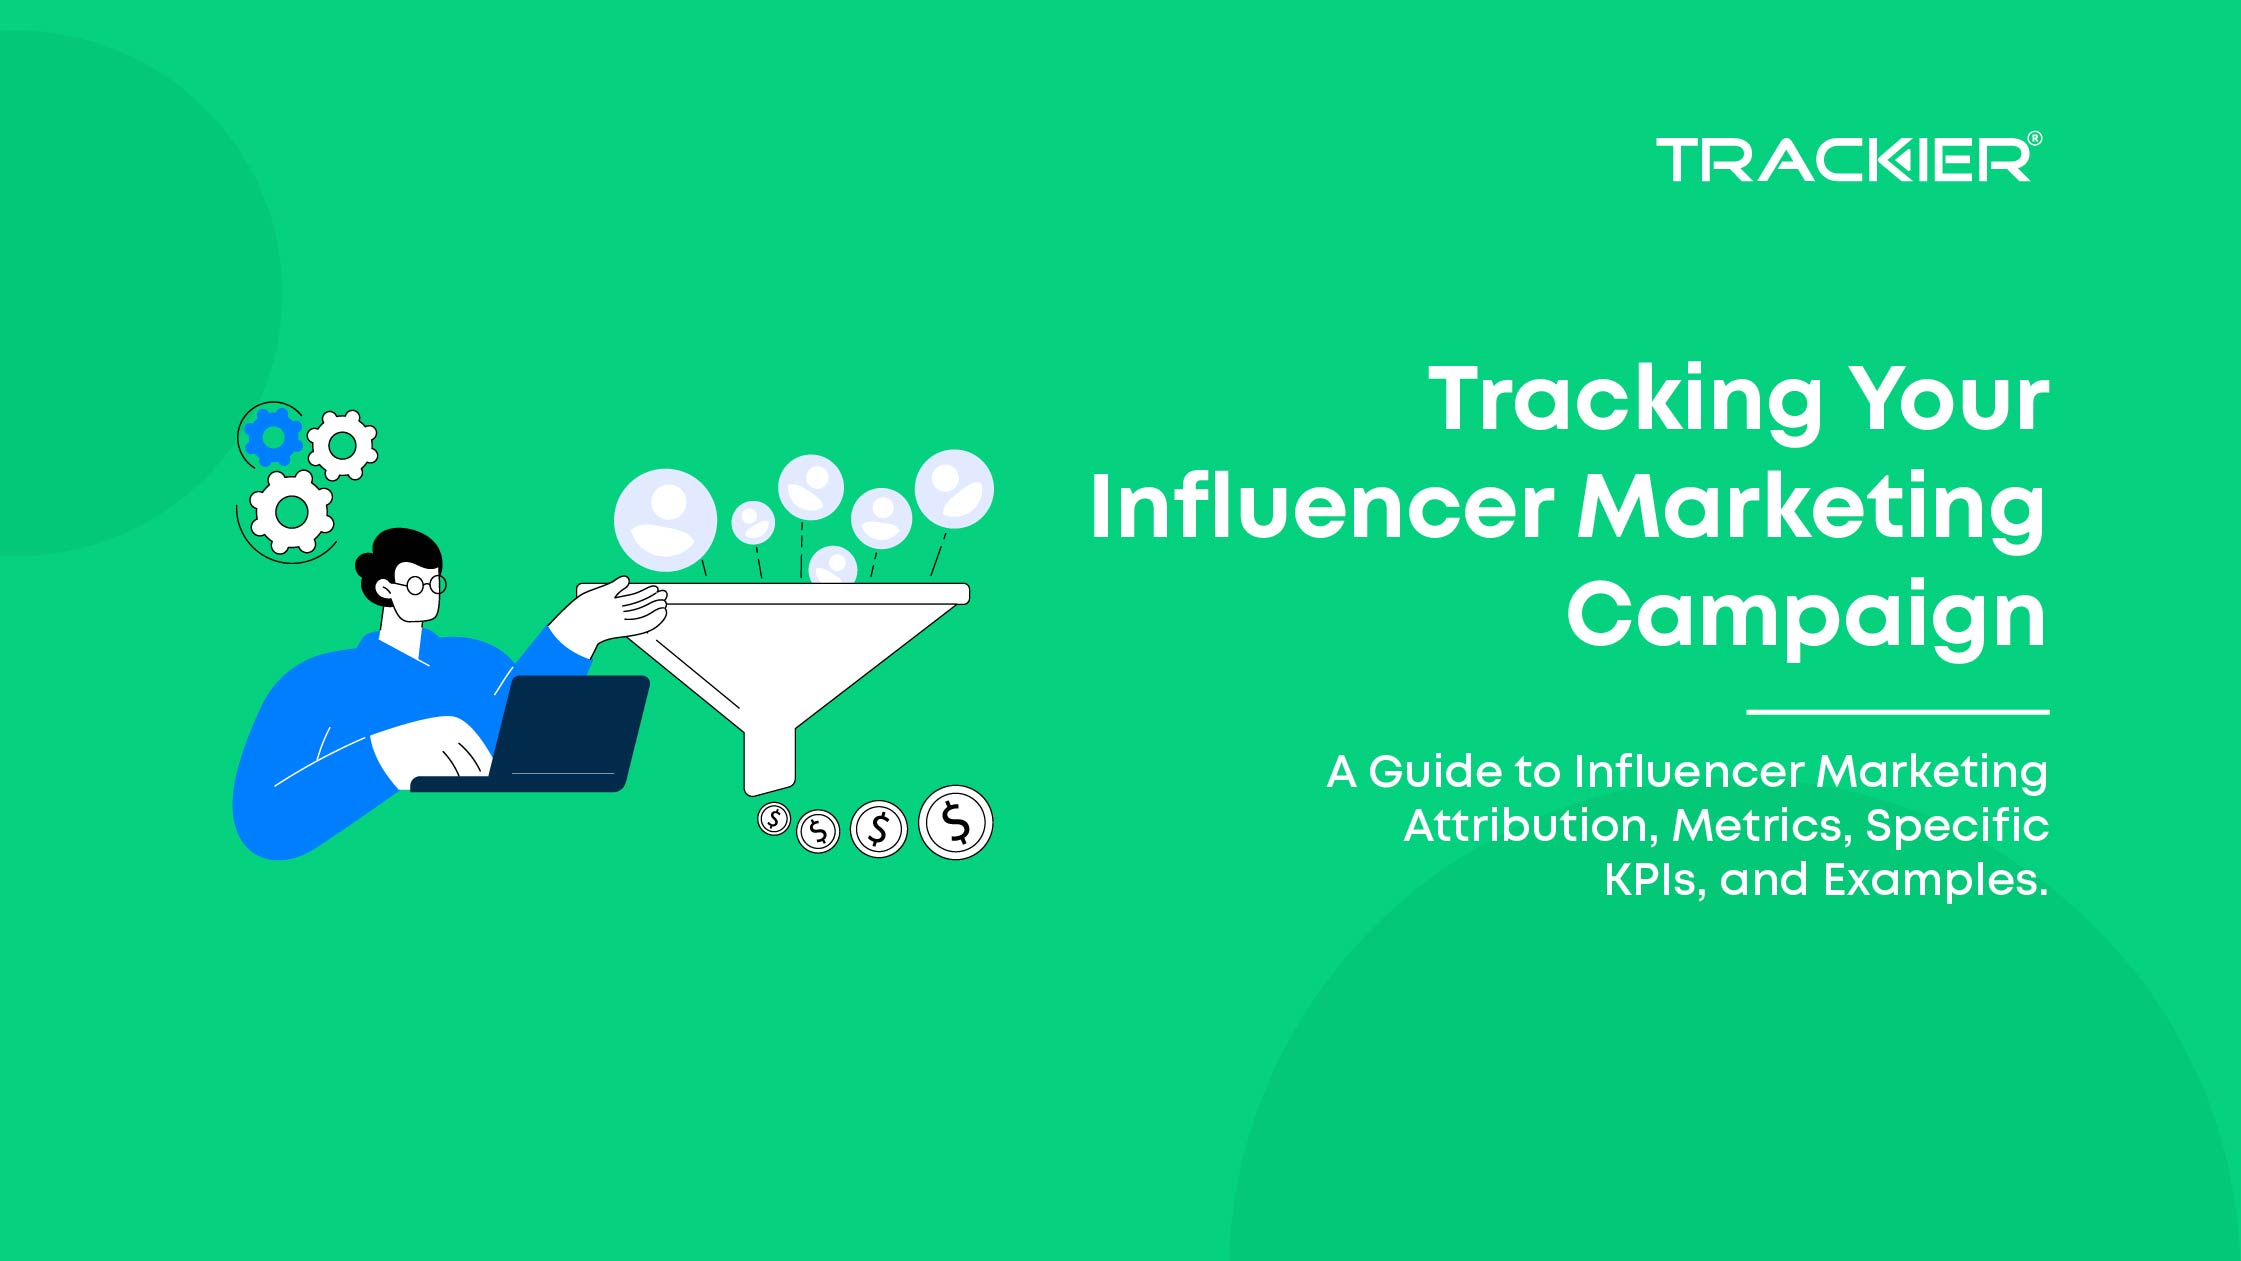 Track Your Influencer Marketing Campaign